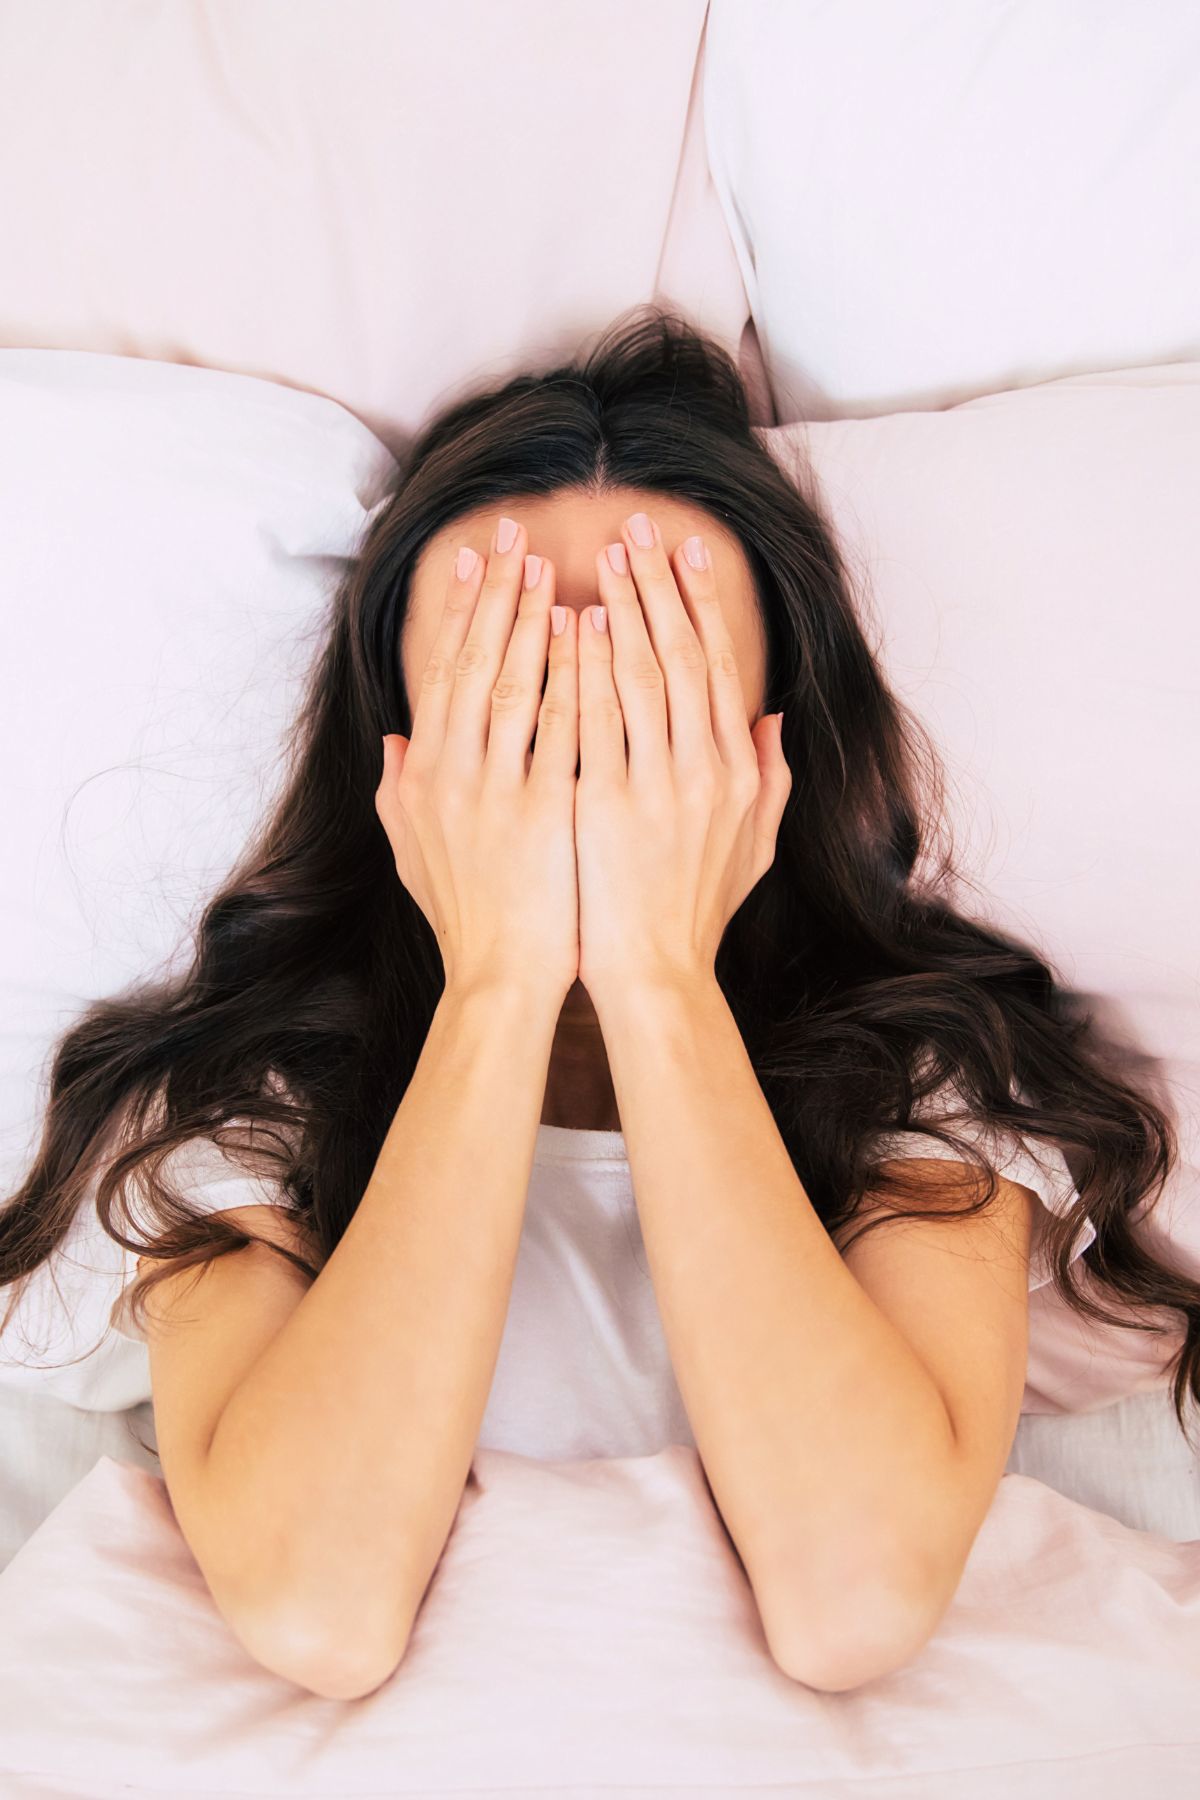 A woman with long dark hair lays in bed with her hands over her face.